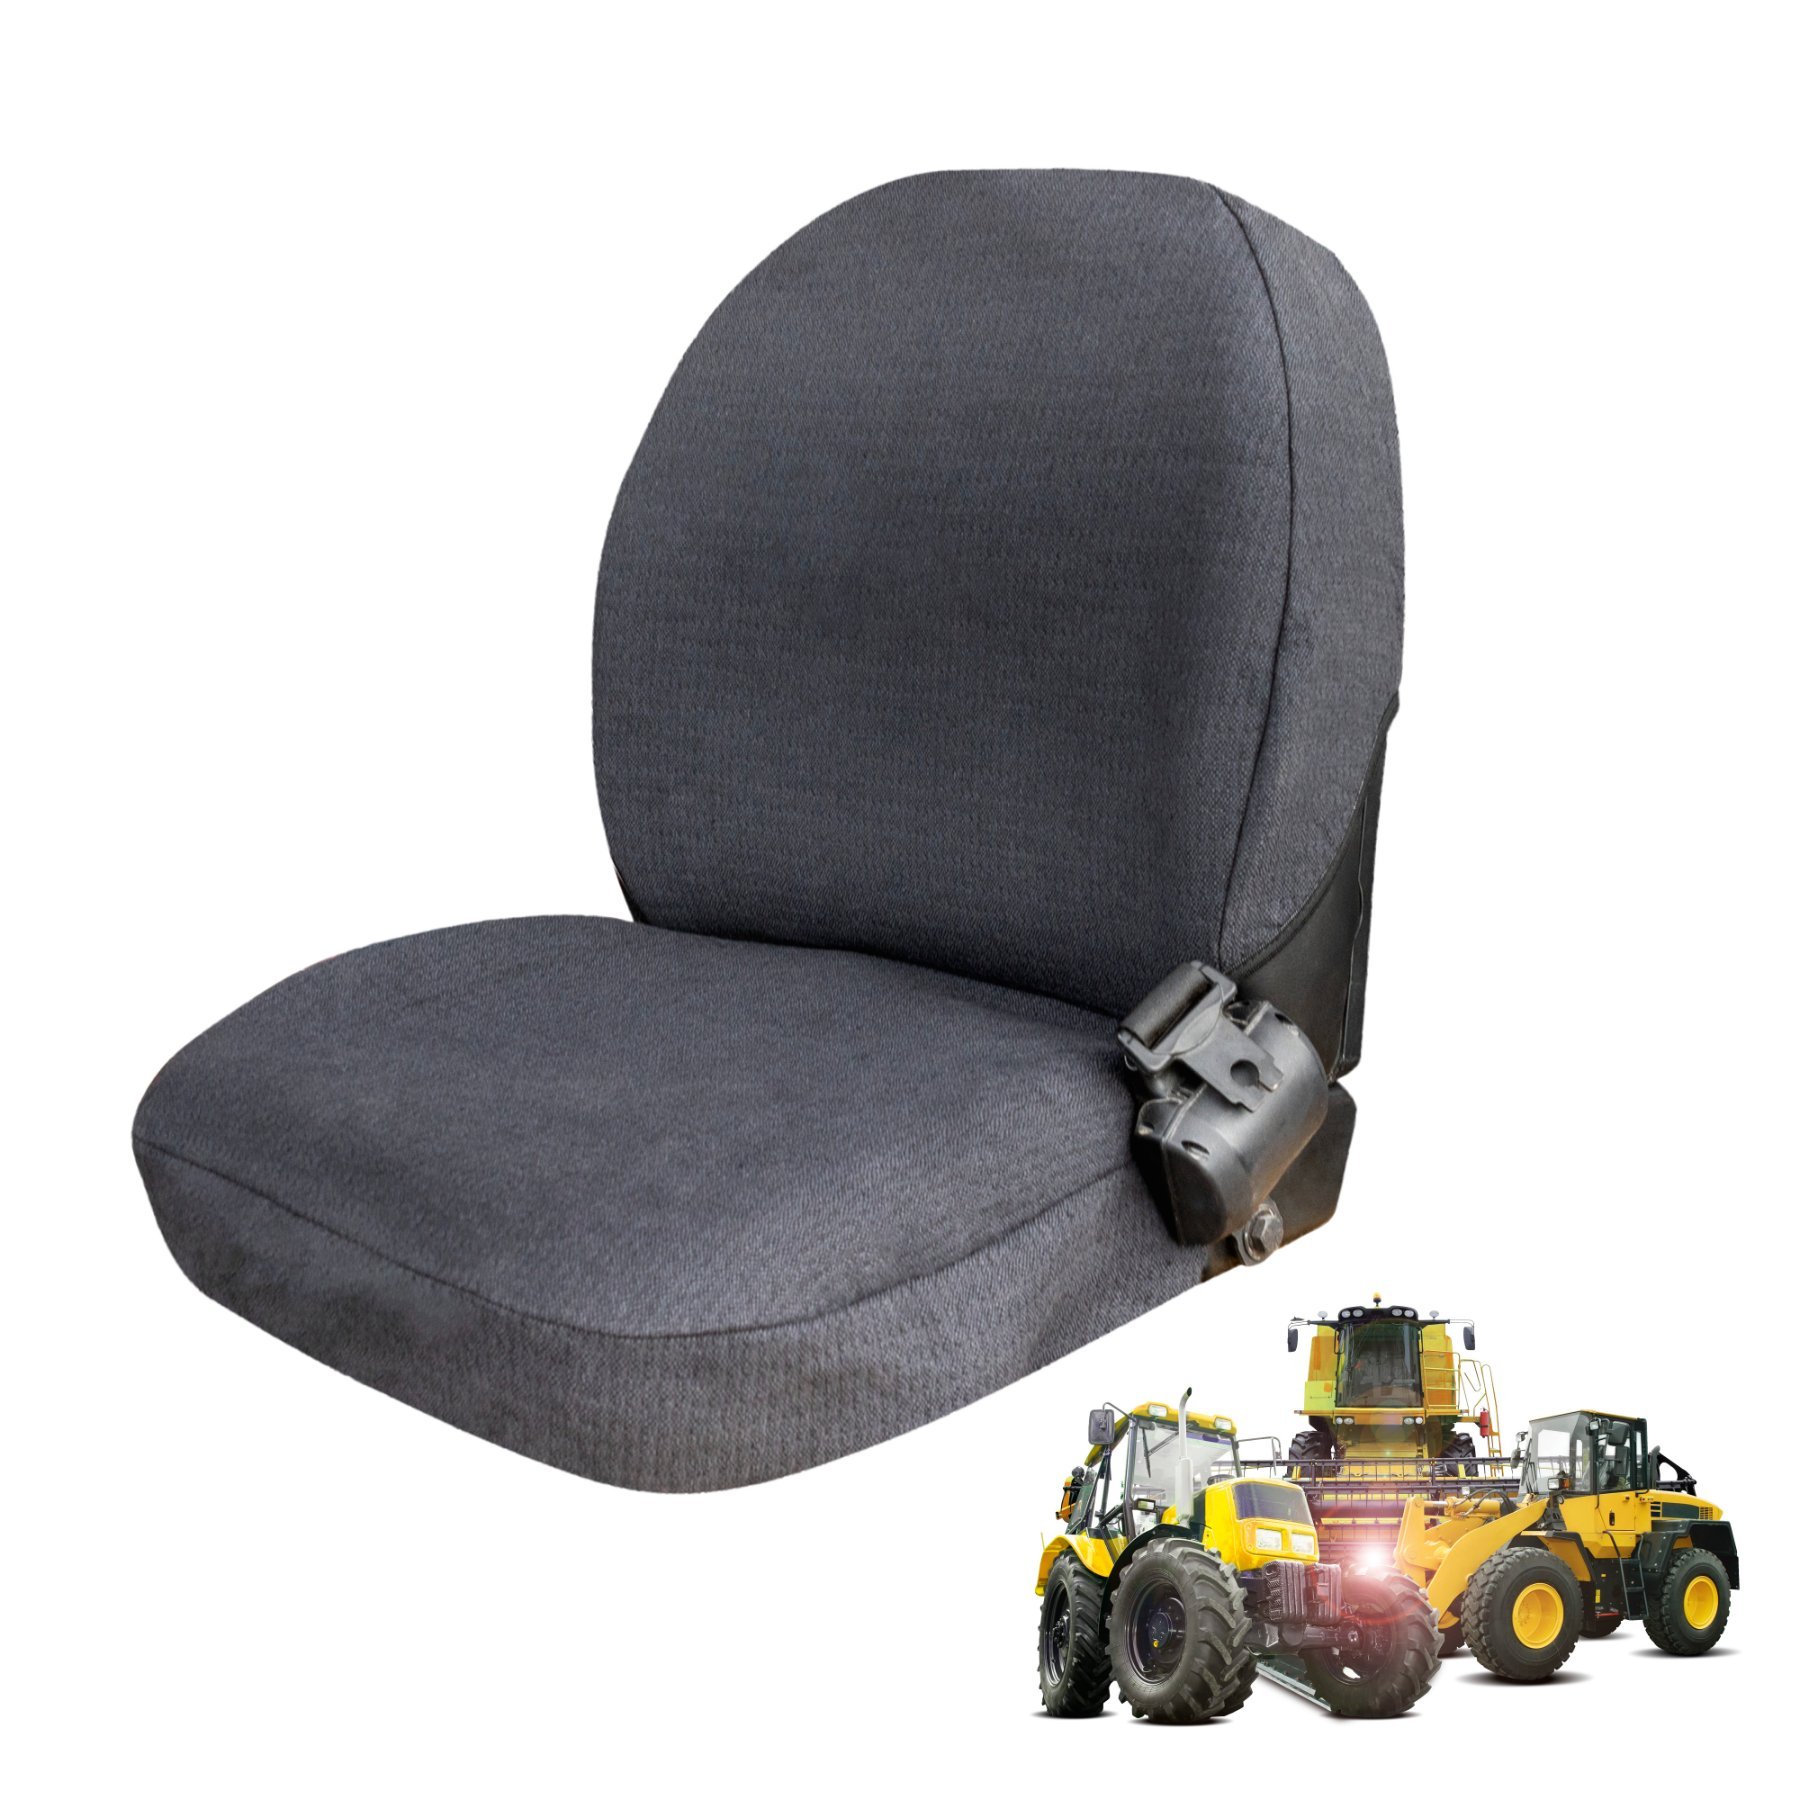 Seat cover construction machinery, combine harvesters, forage harvesters, size 2